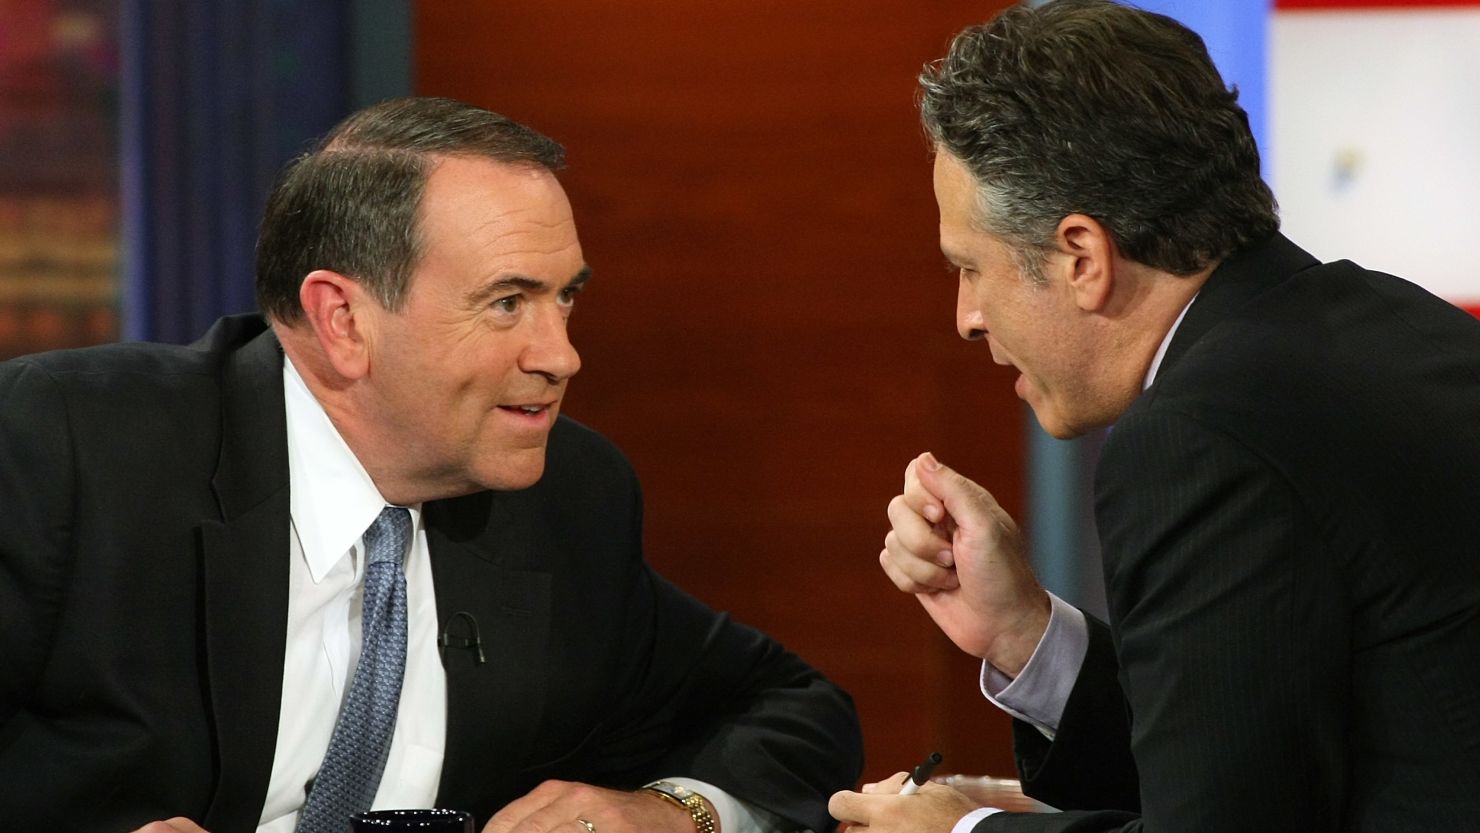 Jon Stewart, right,  interviews Mike Huckabee on the 'The Daily Show" in September, 2008. Huckabee is now with Fox News.